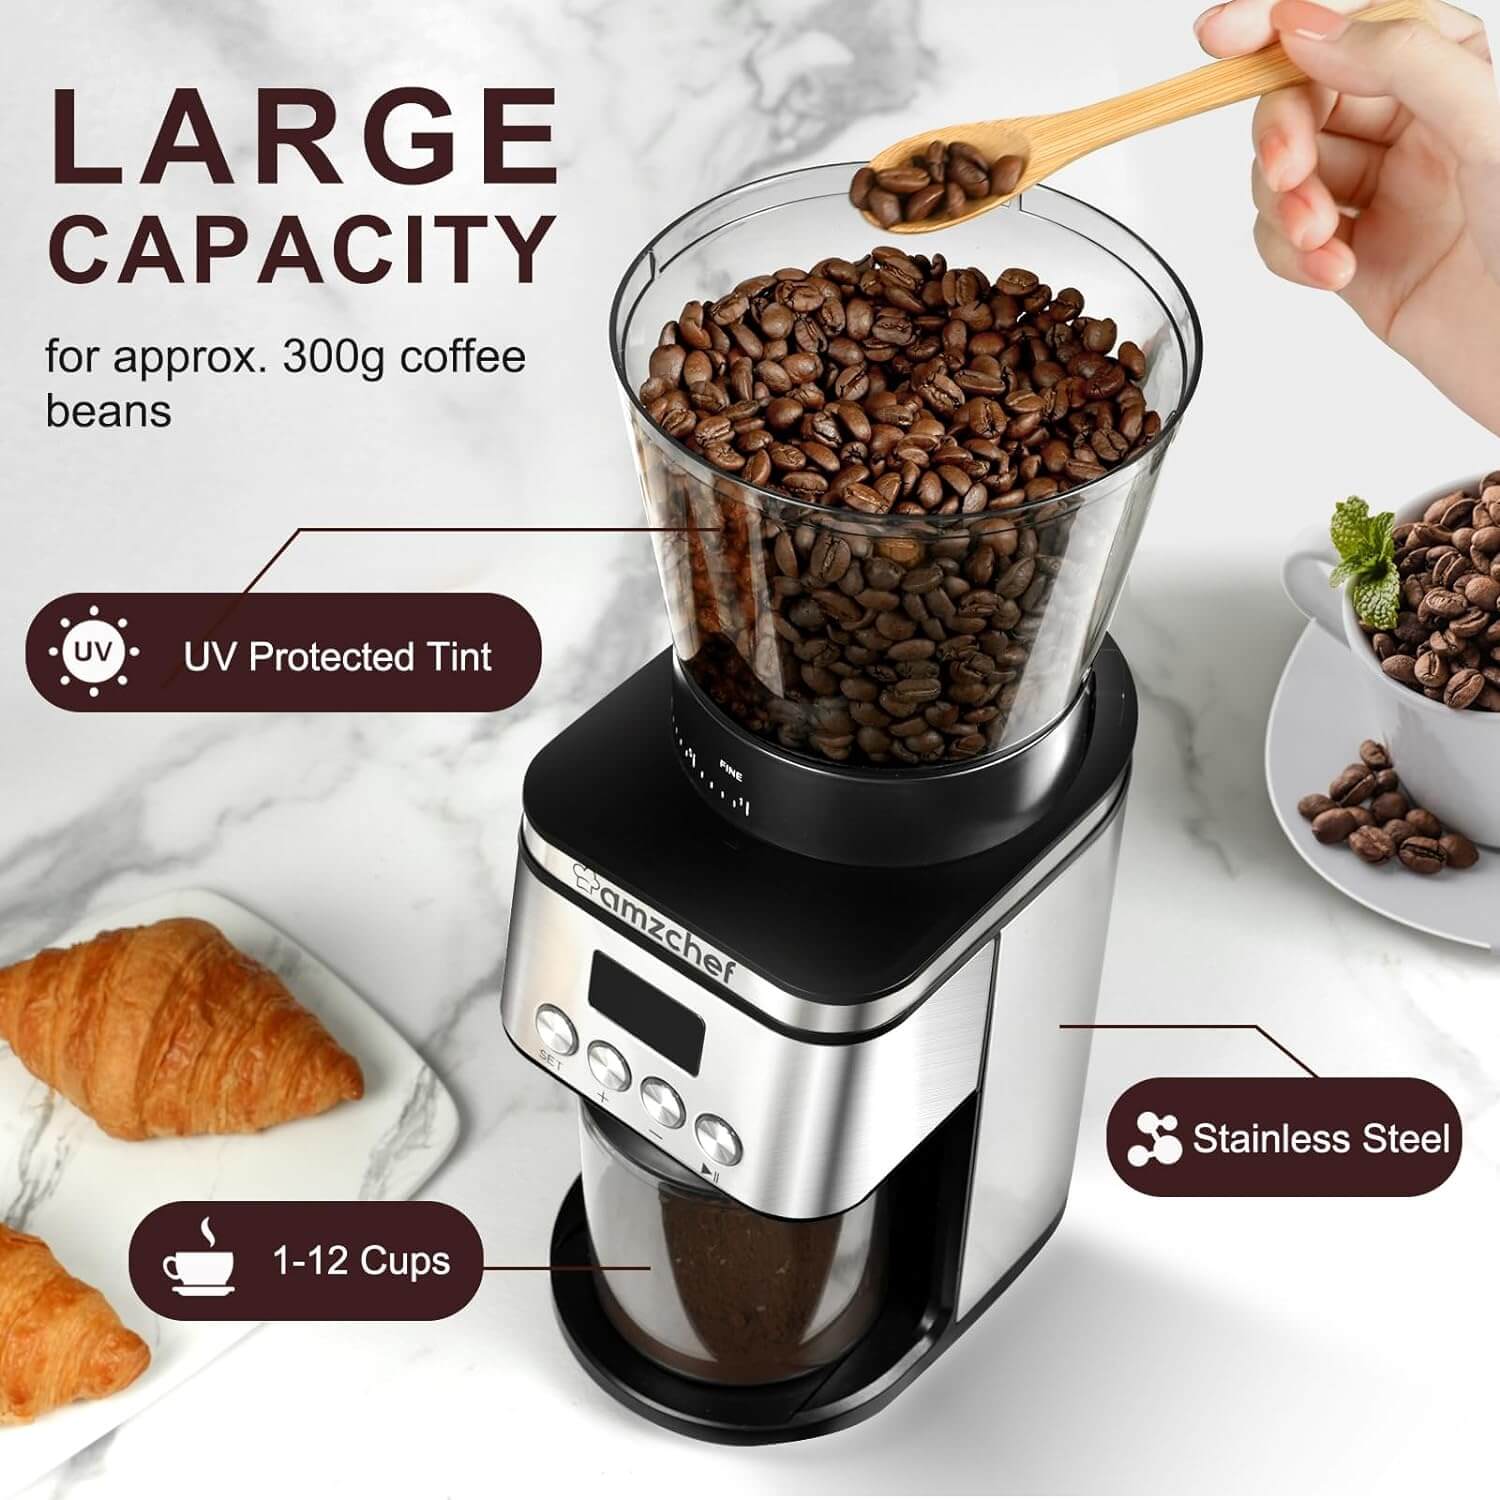 AMZCHEF Electric Coffee Bean Grinder with 30 Precise Settings